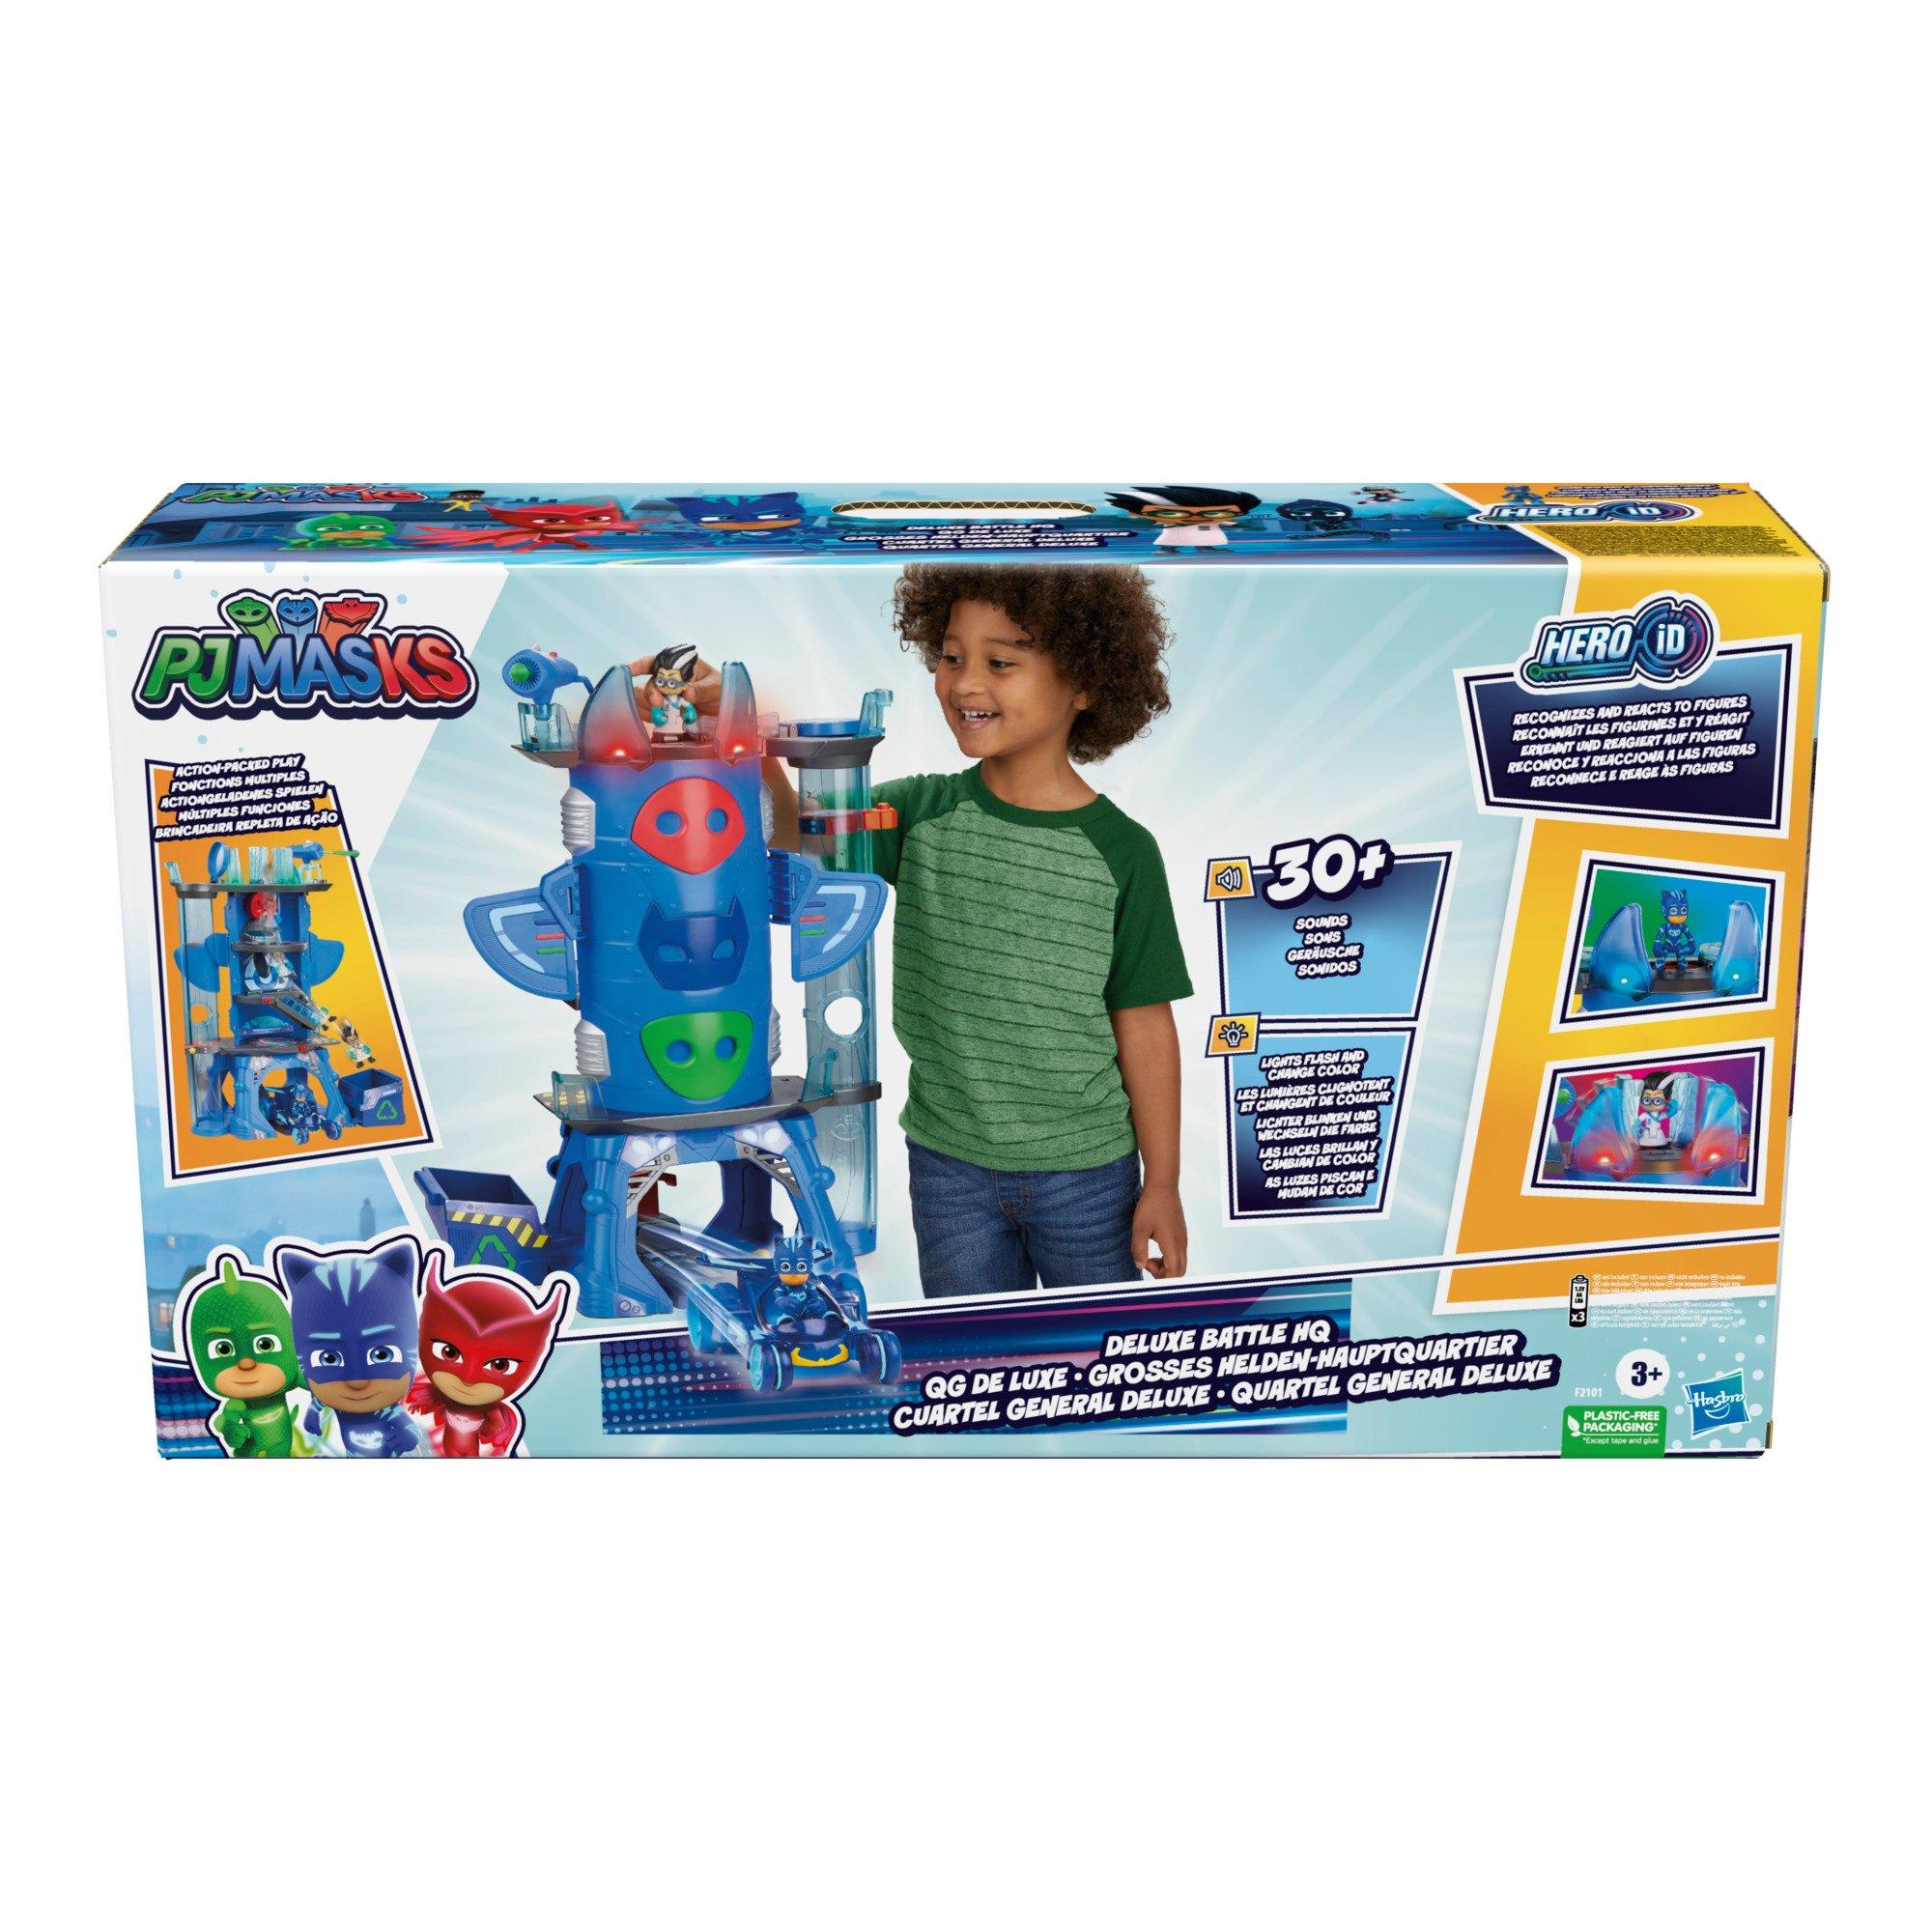 Exclusive Just Play PJ Masks Deluxe Headquarters Playset 